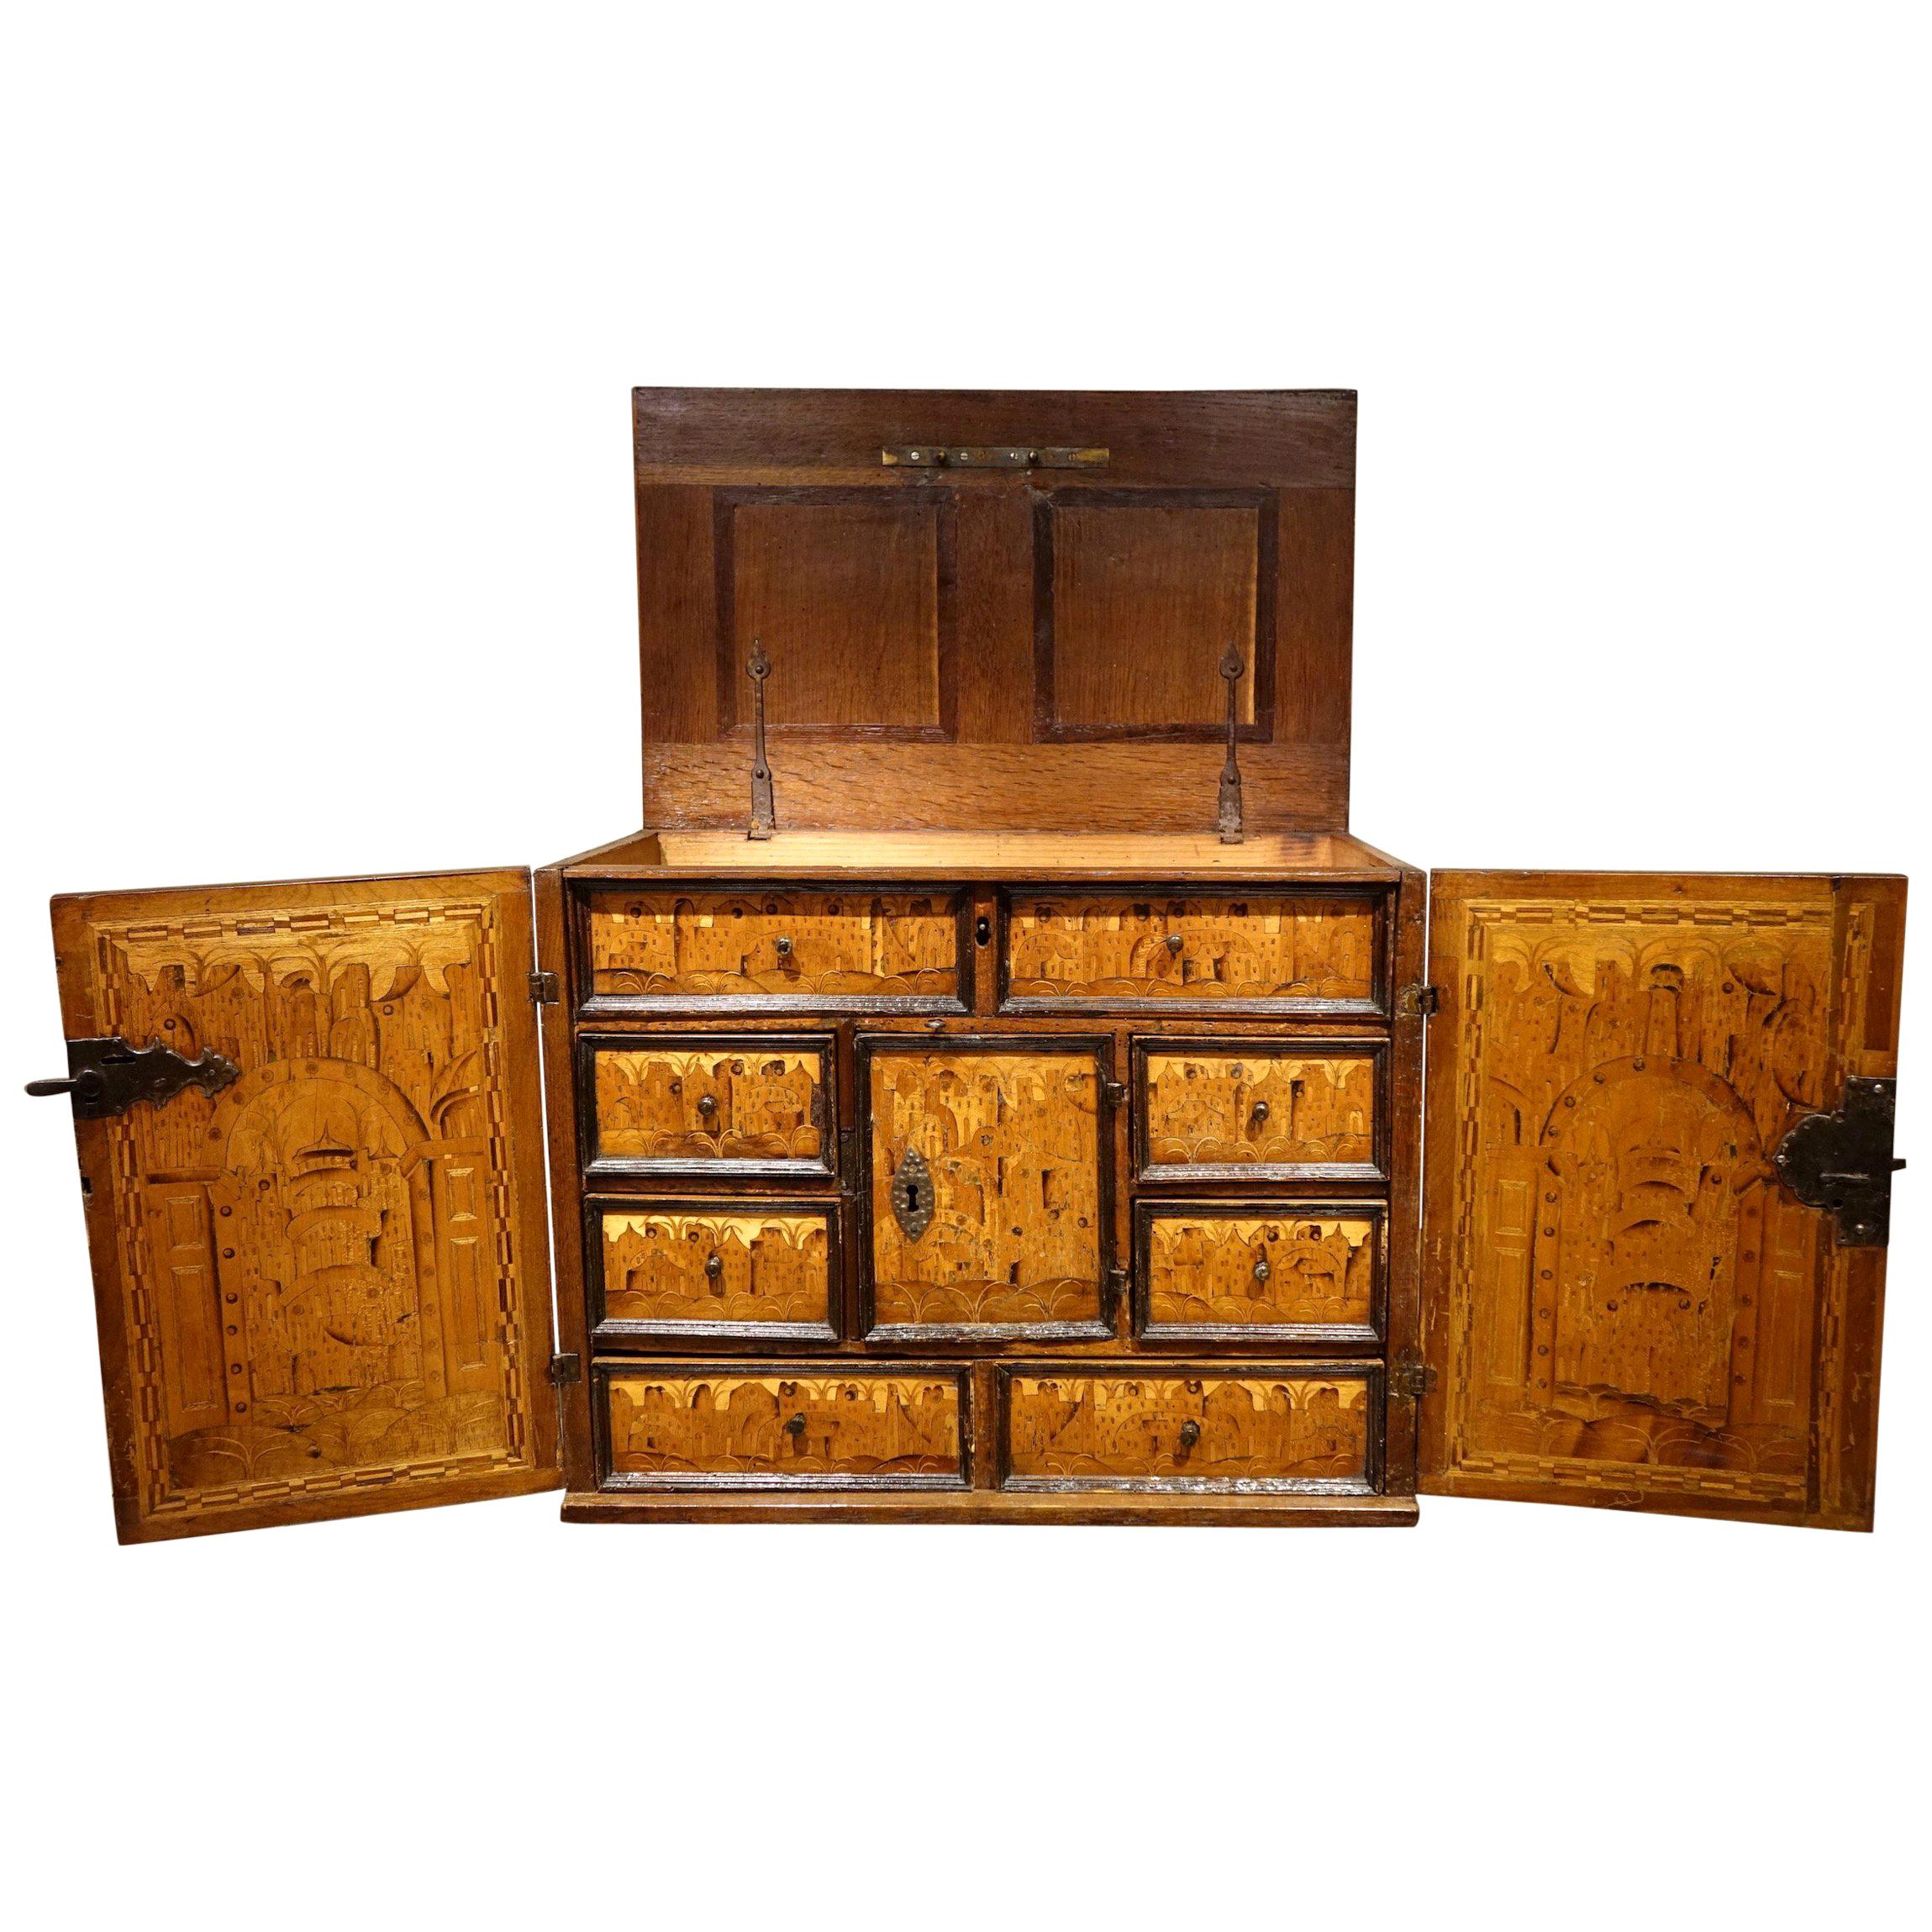 16th Century German Cabinet with a Floral and Architectural Decoration For Sale